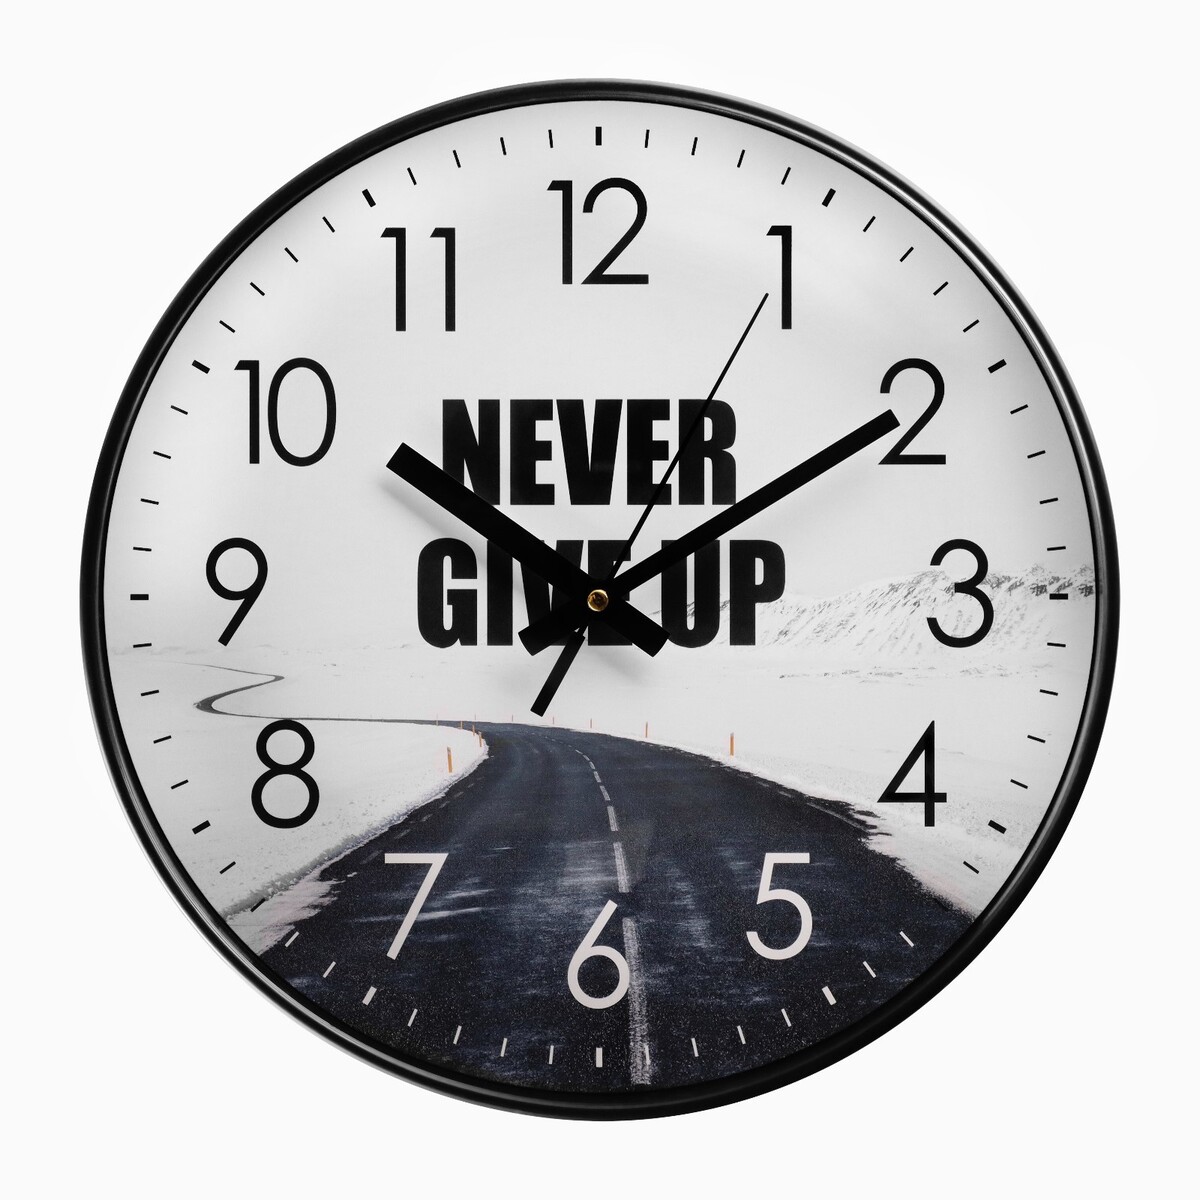   never give up, d-30 ,  